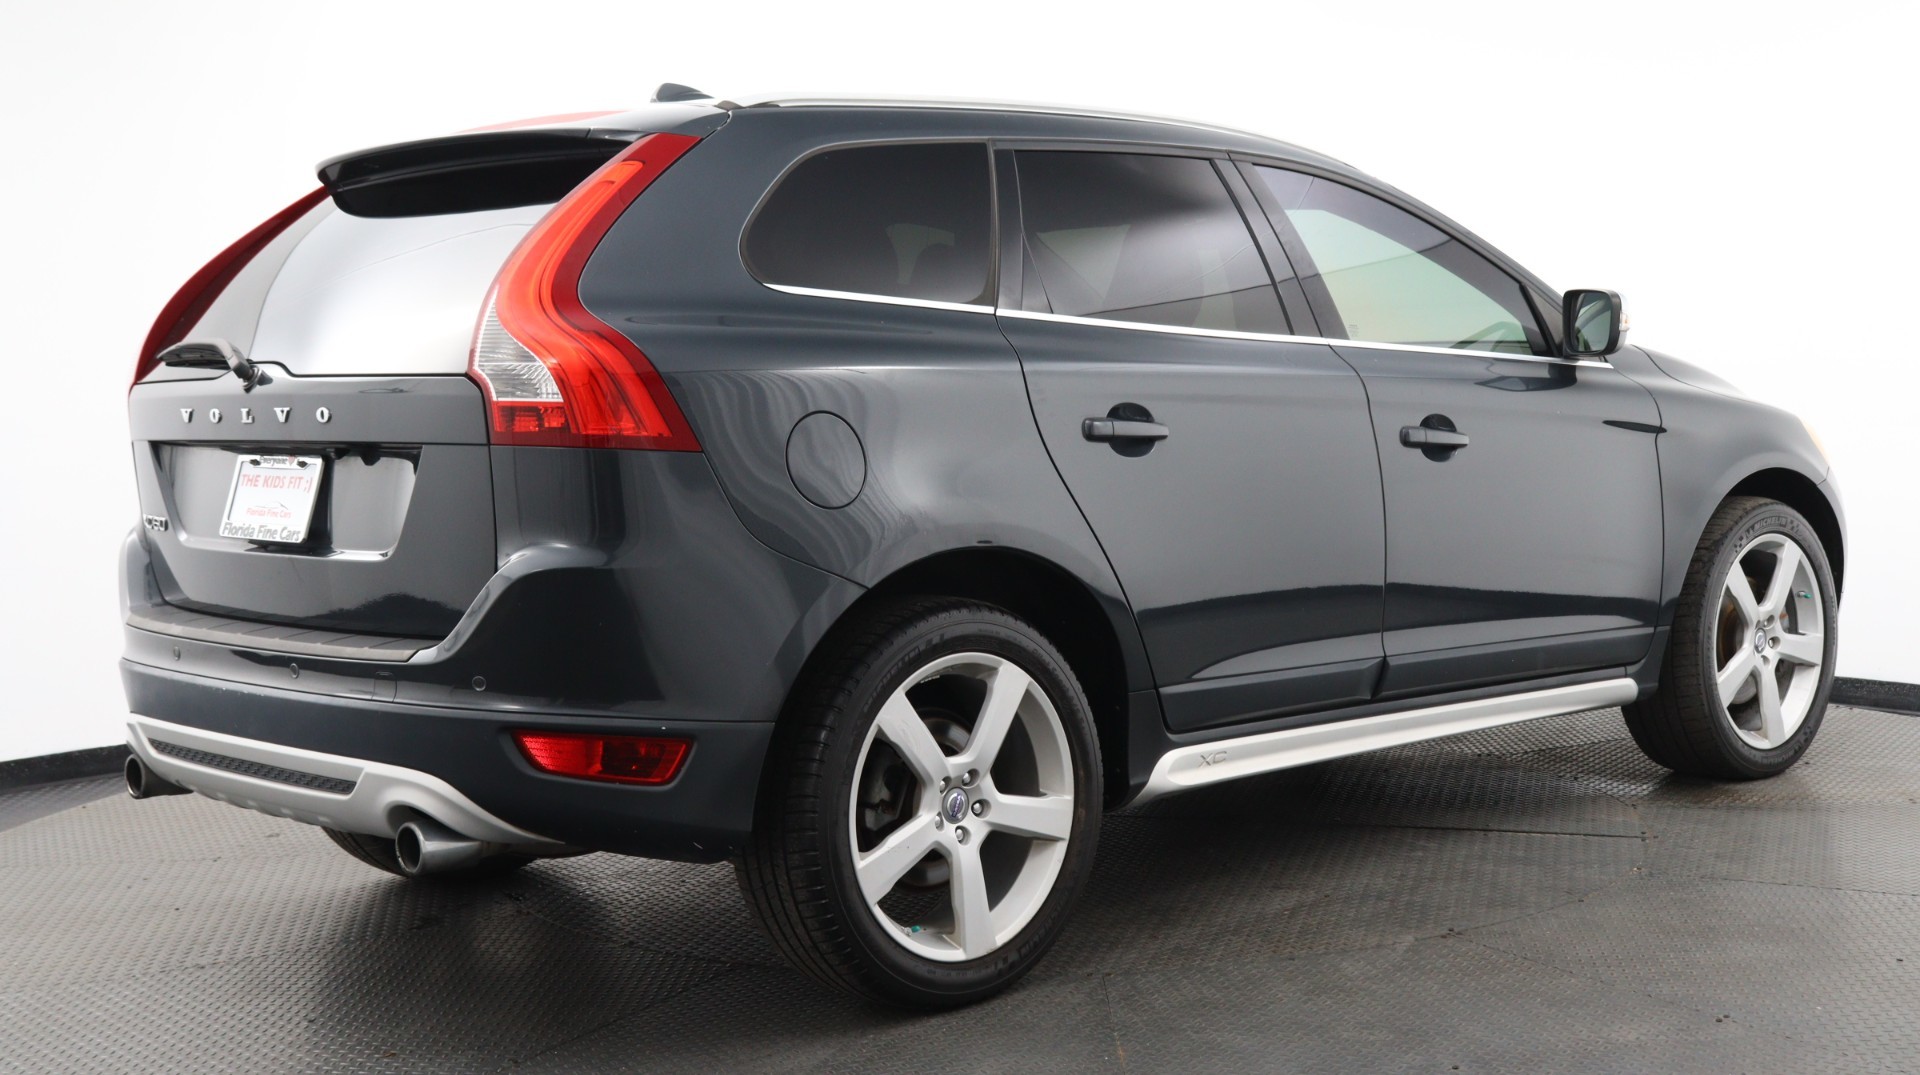 Used 2011 VOLVO XC60 3.2L for sale in MARGATE | 127893